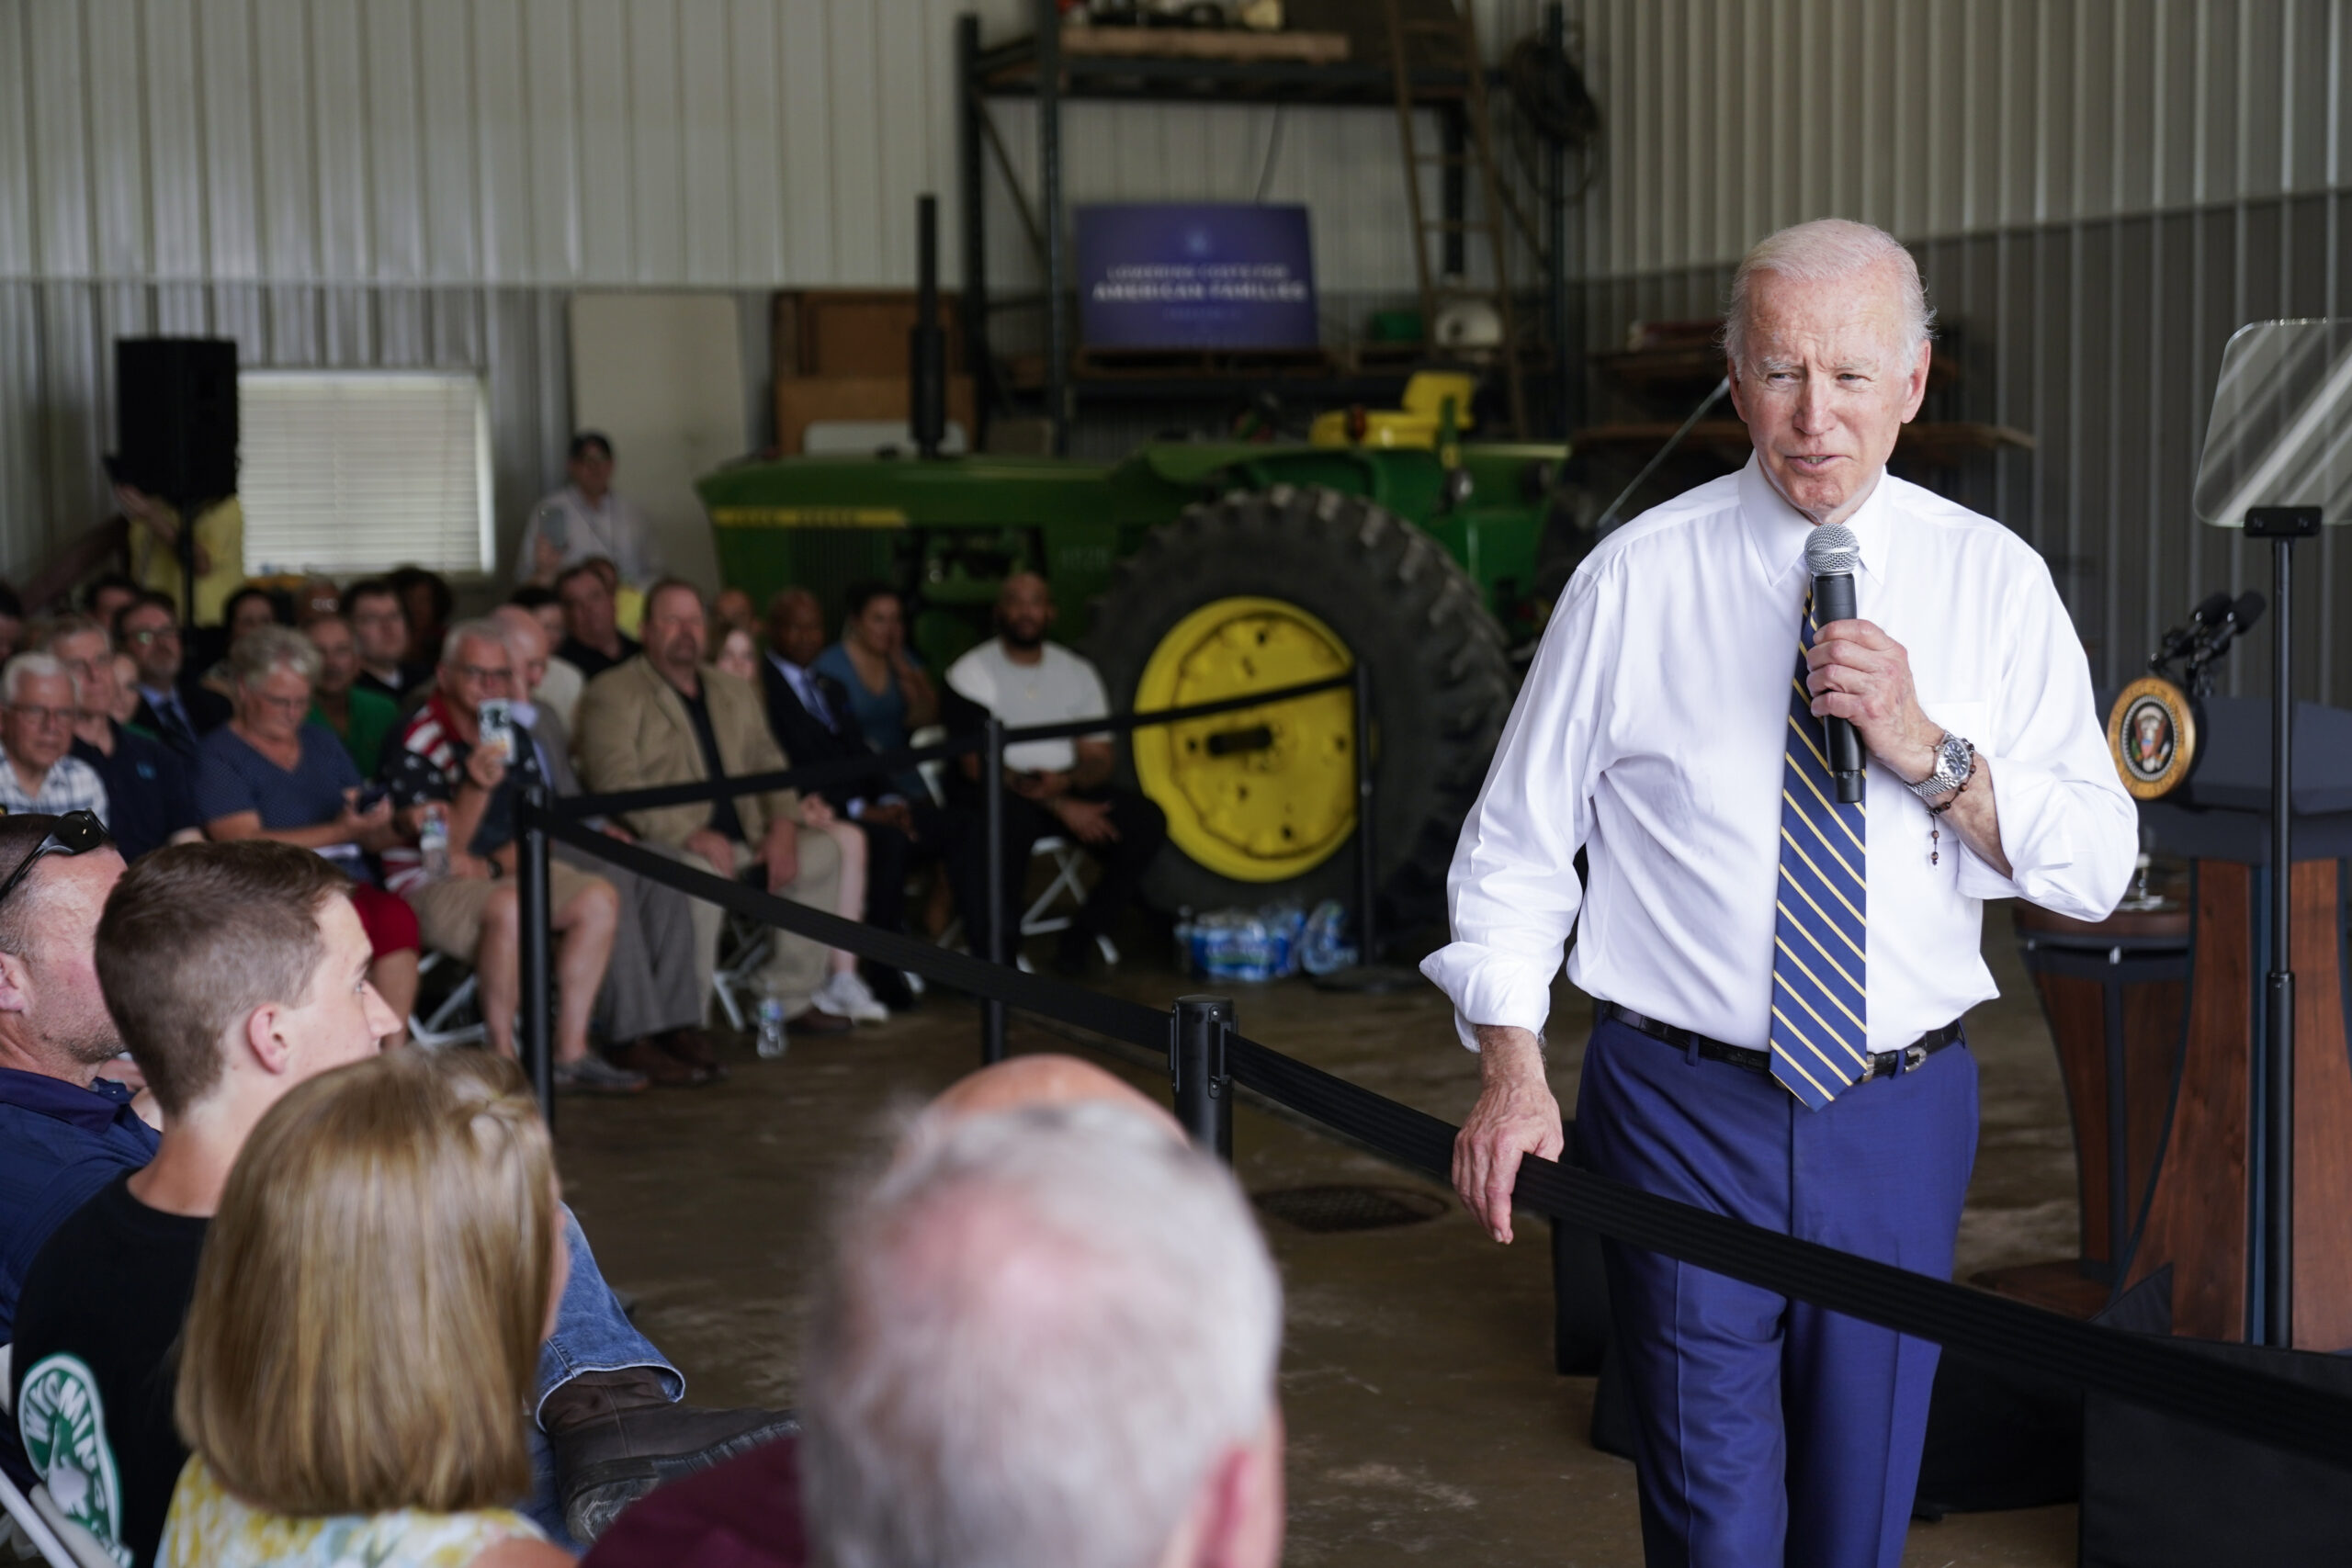 President Joe Biden speaks during a visit to O'Connor Farms, Wednesday, May 11, 2022, in Kankakee, Ill. Biden visited the farm to discuss food supply and prices as a result of Putin's invasion of Ukraine. (AP Photo/Andrew Harnik)